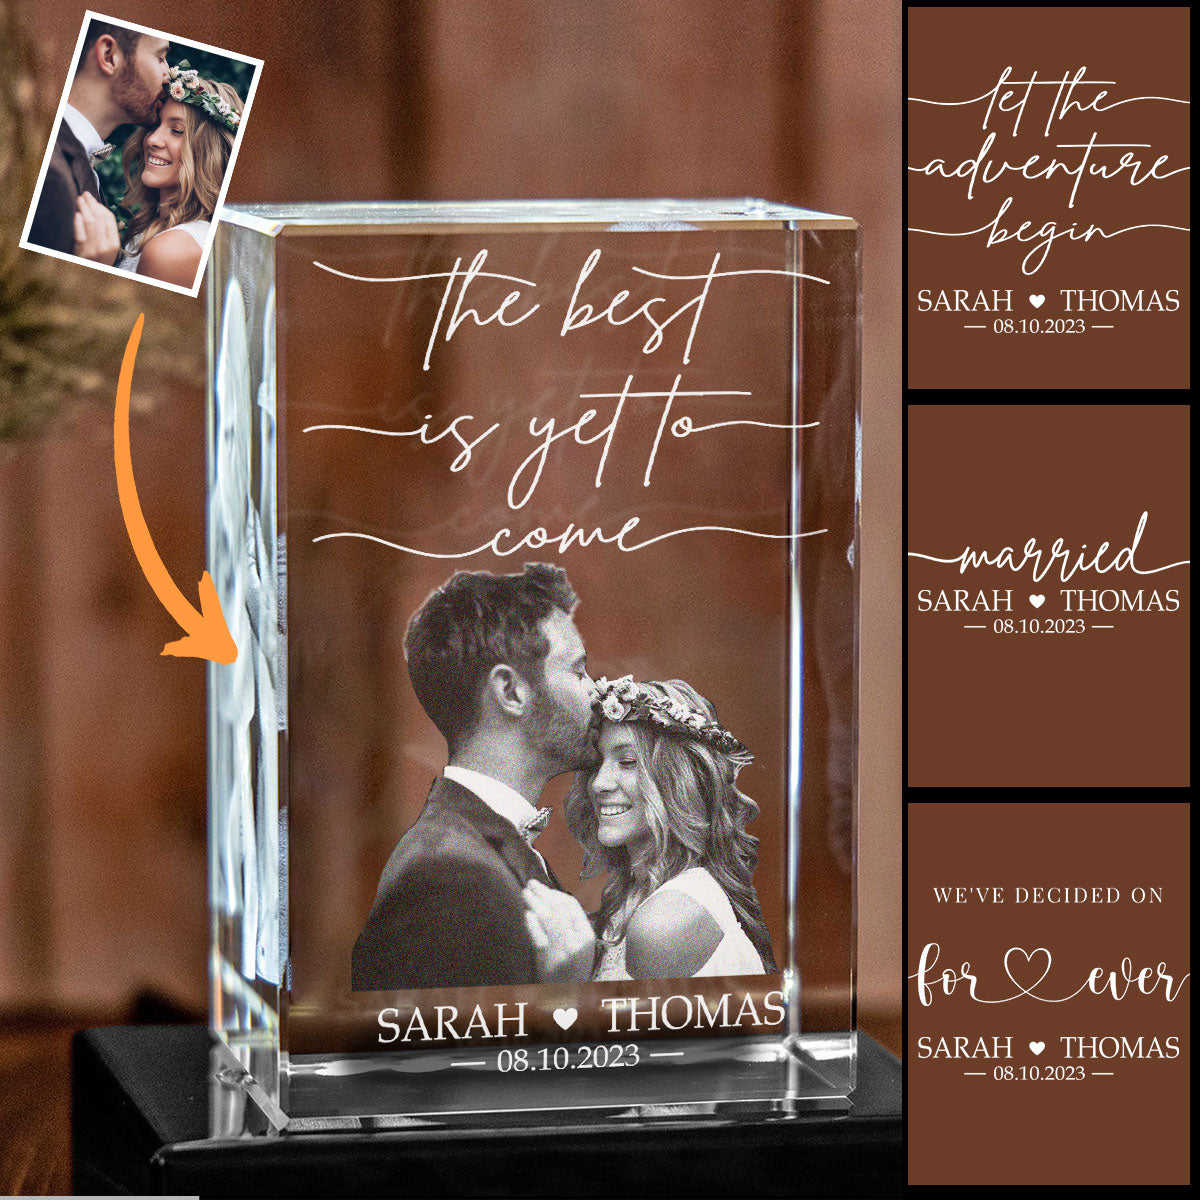 The Best Is Yet To Come - wedding gift for husband, wife, boyfriend, girlfriend - Personalized Laser Engraving 3D Cuboid Shaped Crystal Lamp